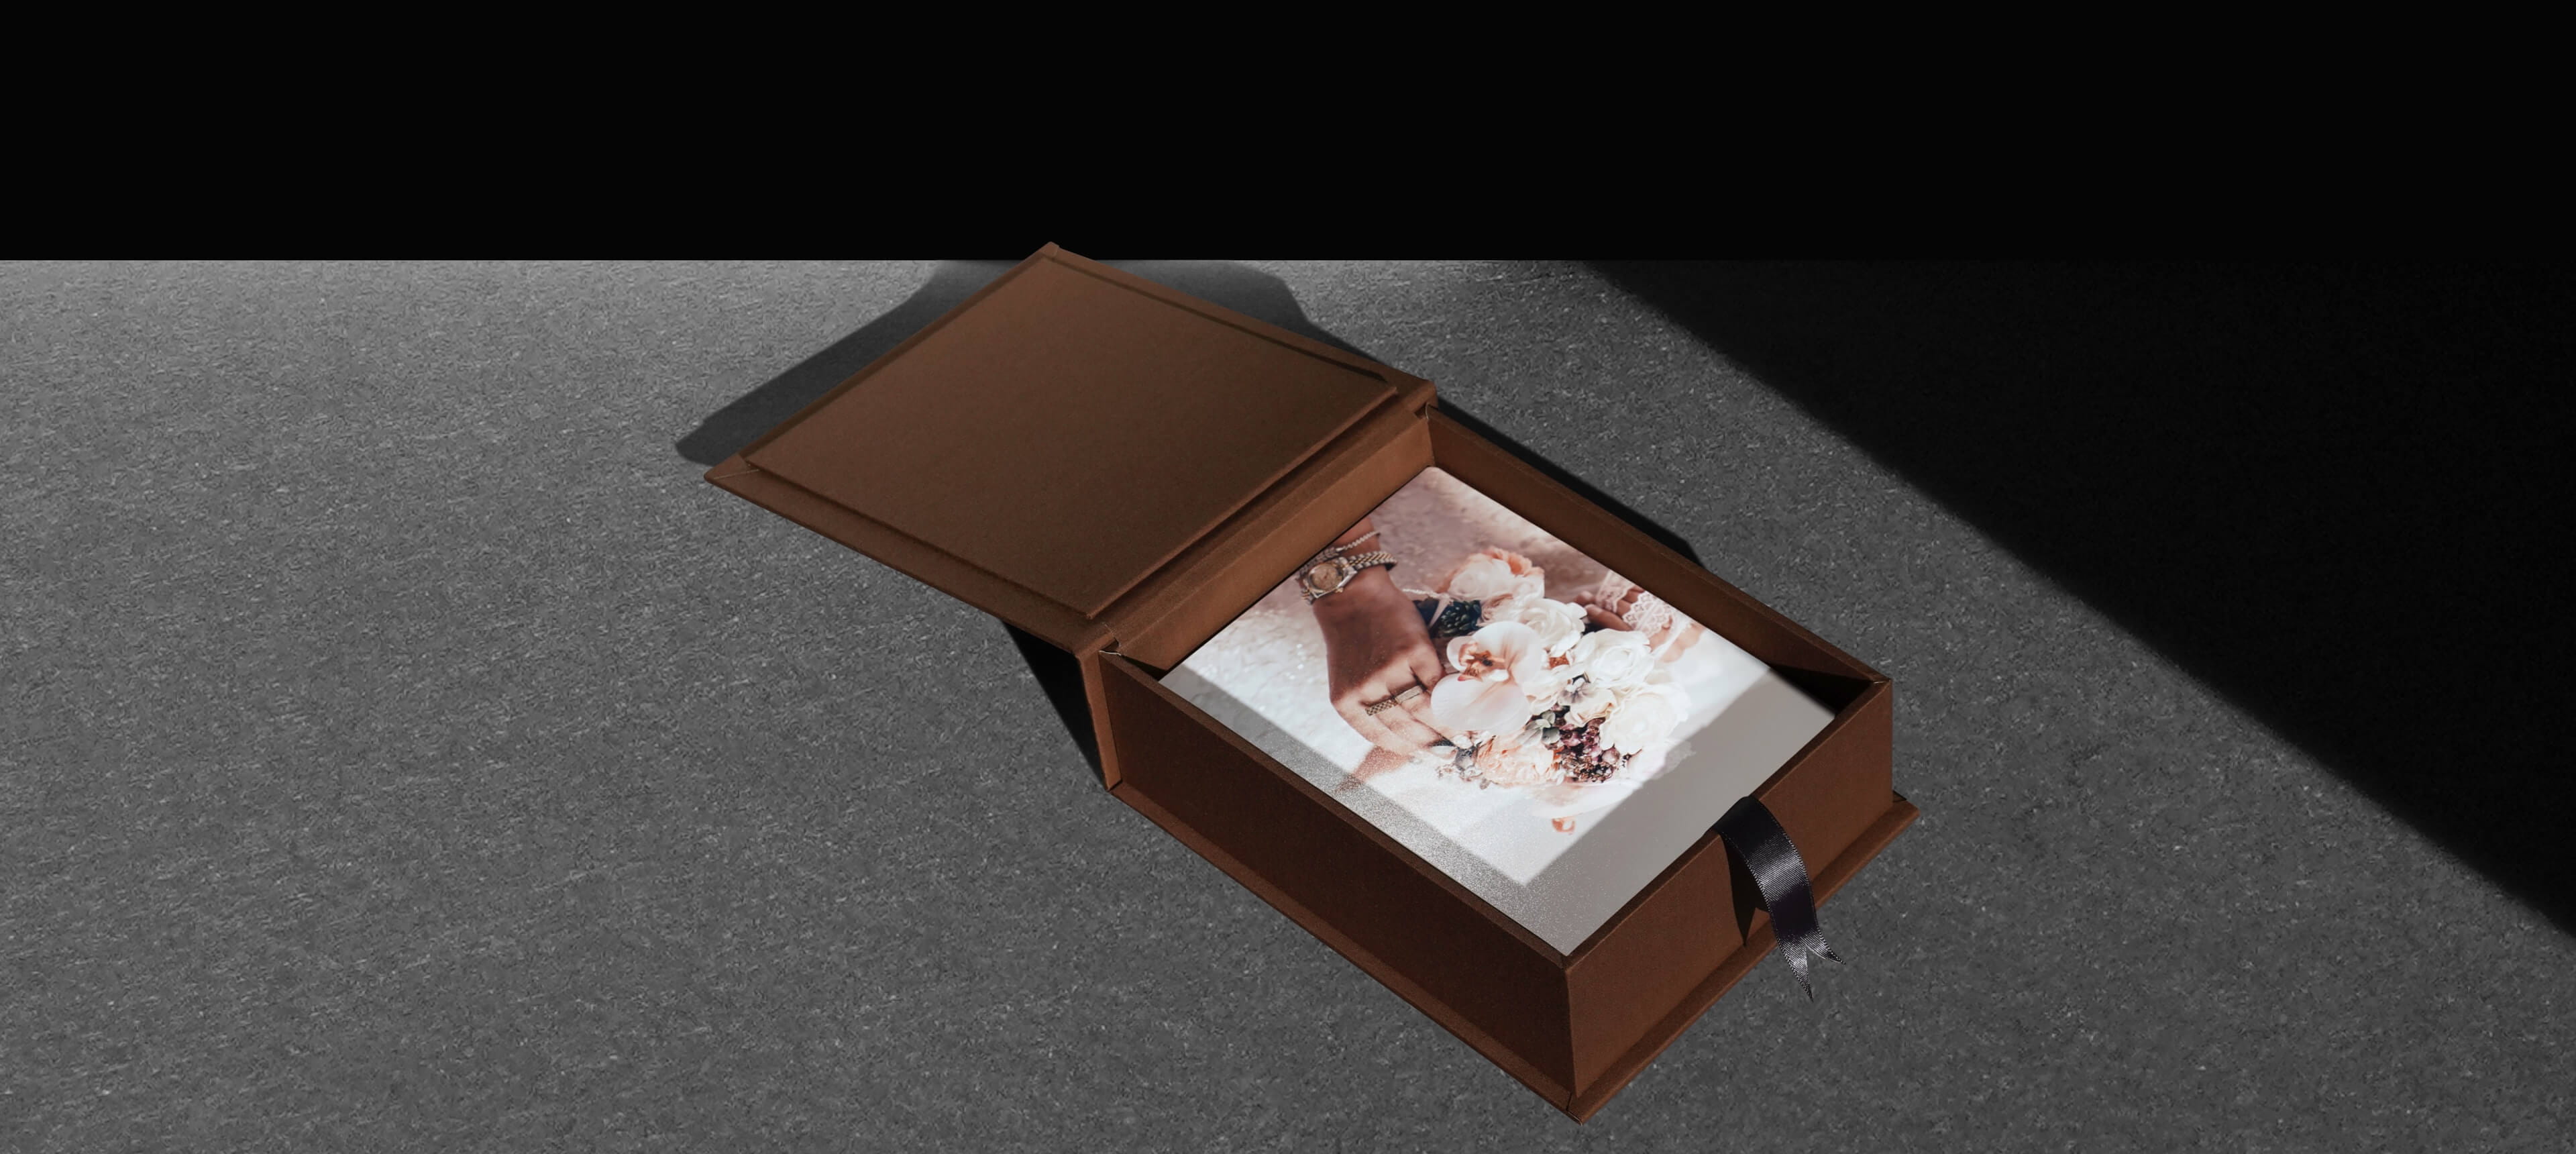 flush mount print in folio box showing a woman holding flowers in hands